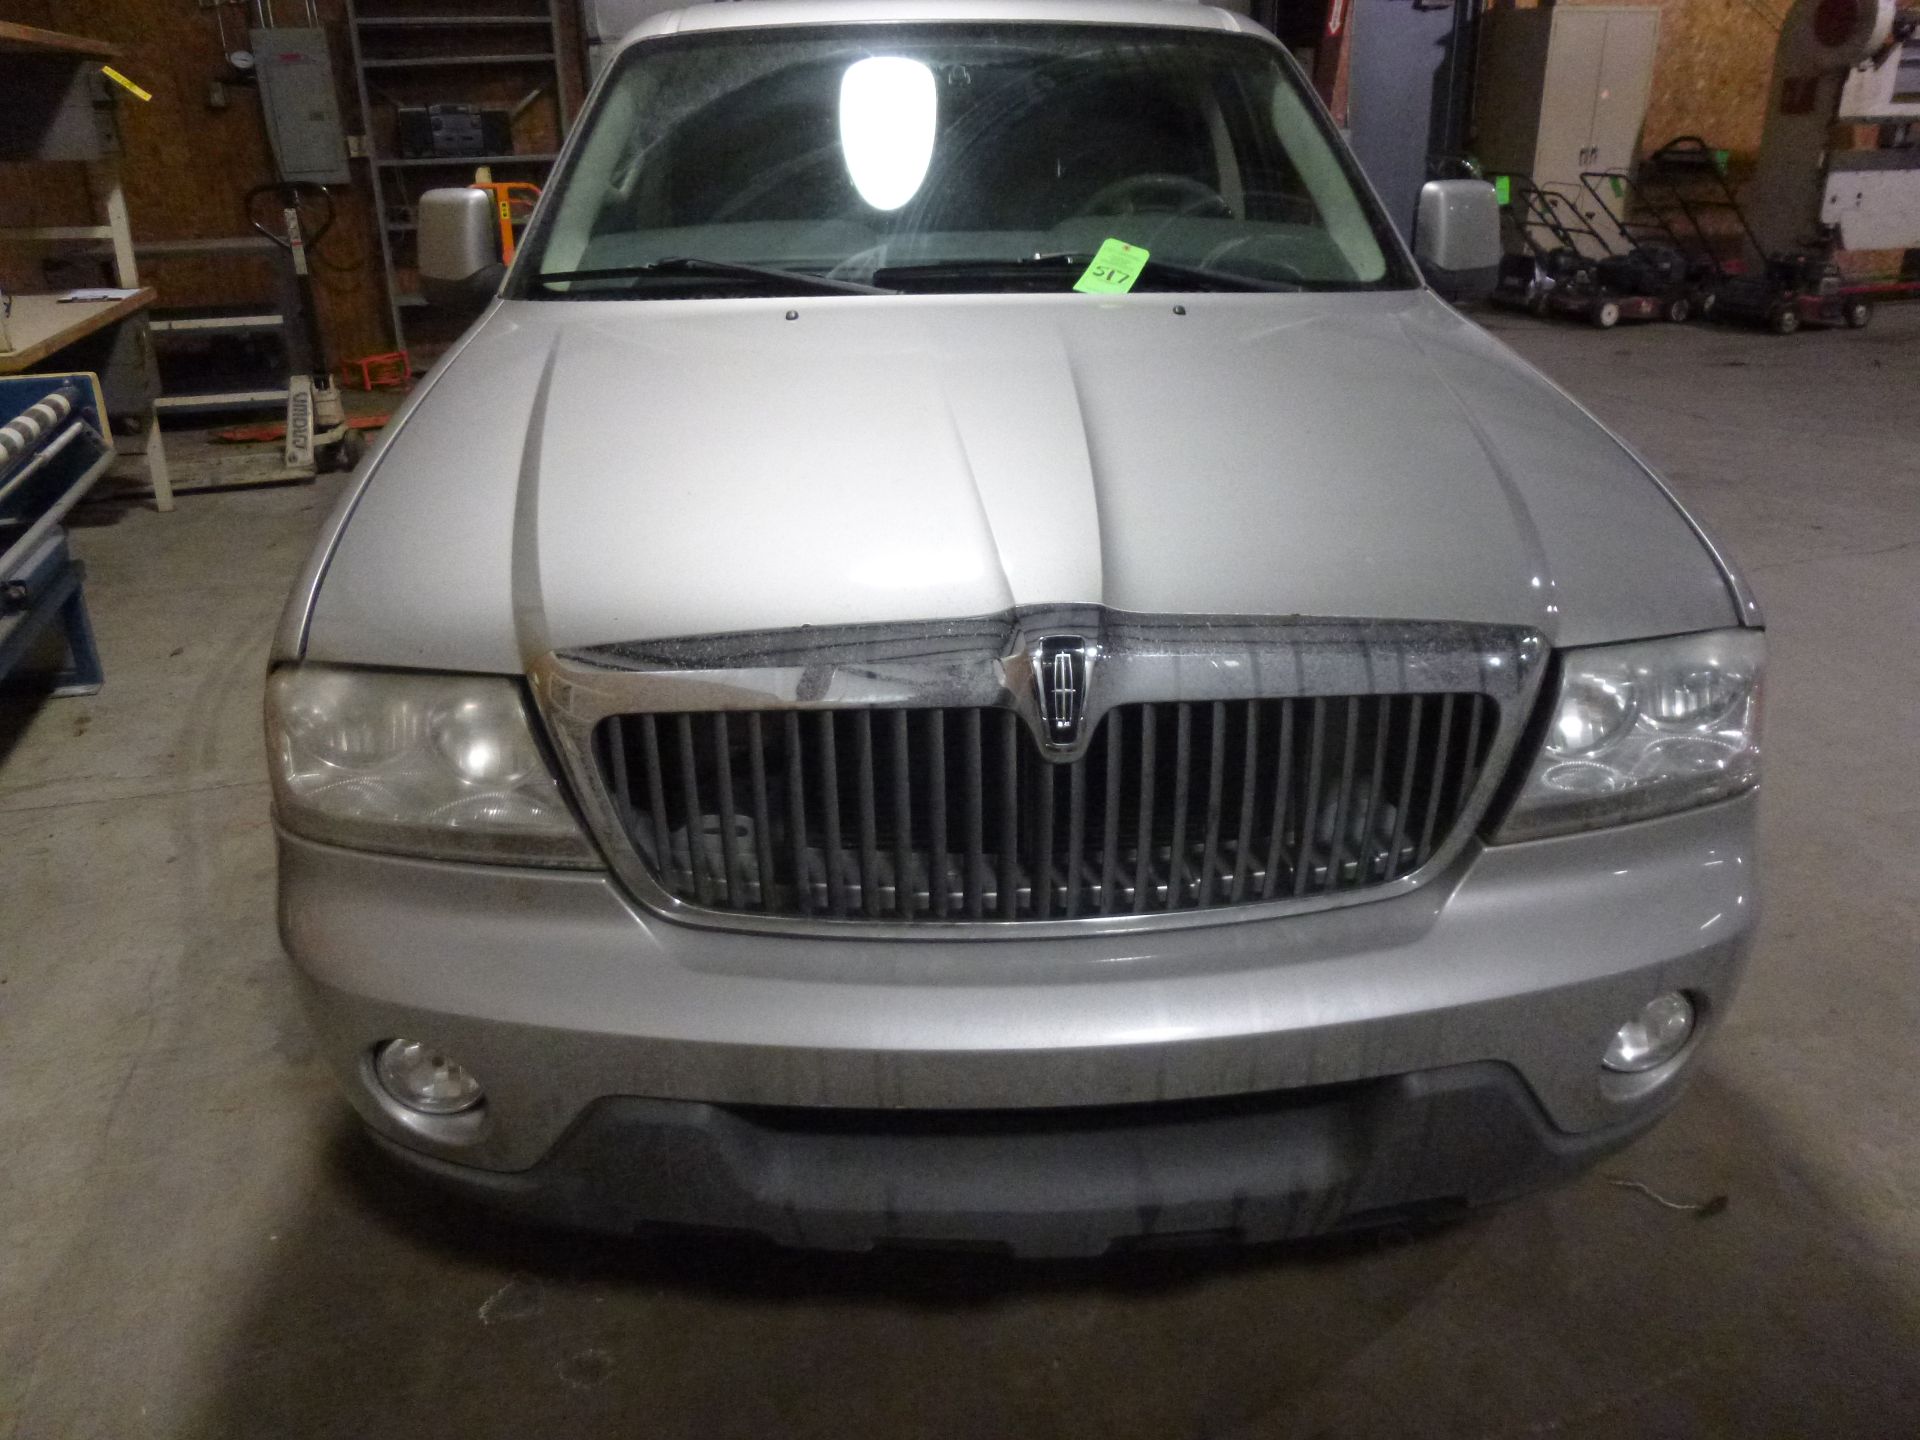 2003 Lincoln Aviator Miles 106974 VIN # 5LMEU78HX3ZJ39820 NO TITLE, This was a seized vehicle that - Image 3 of 12